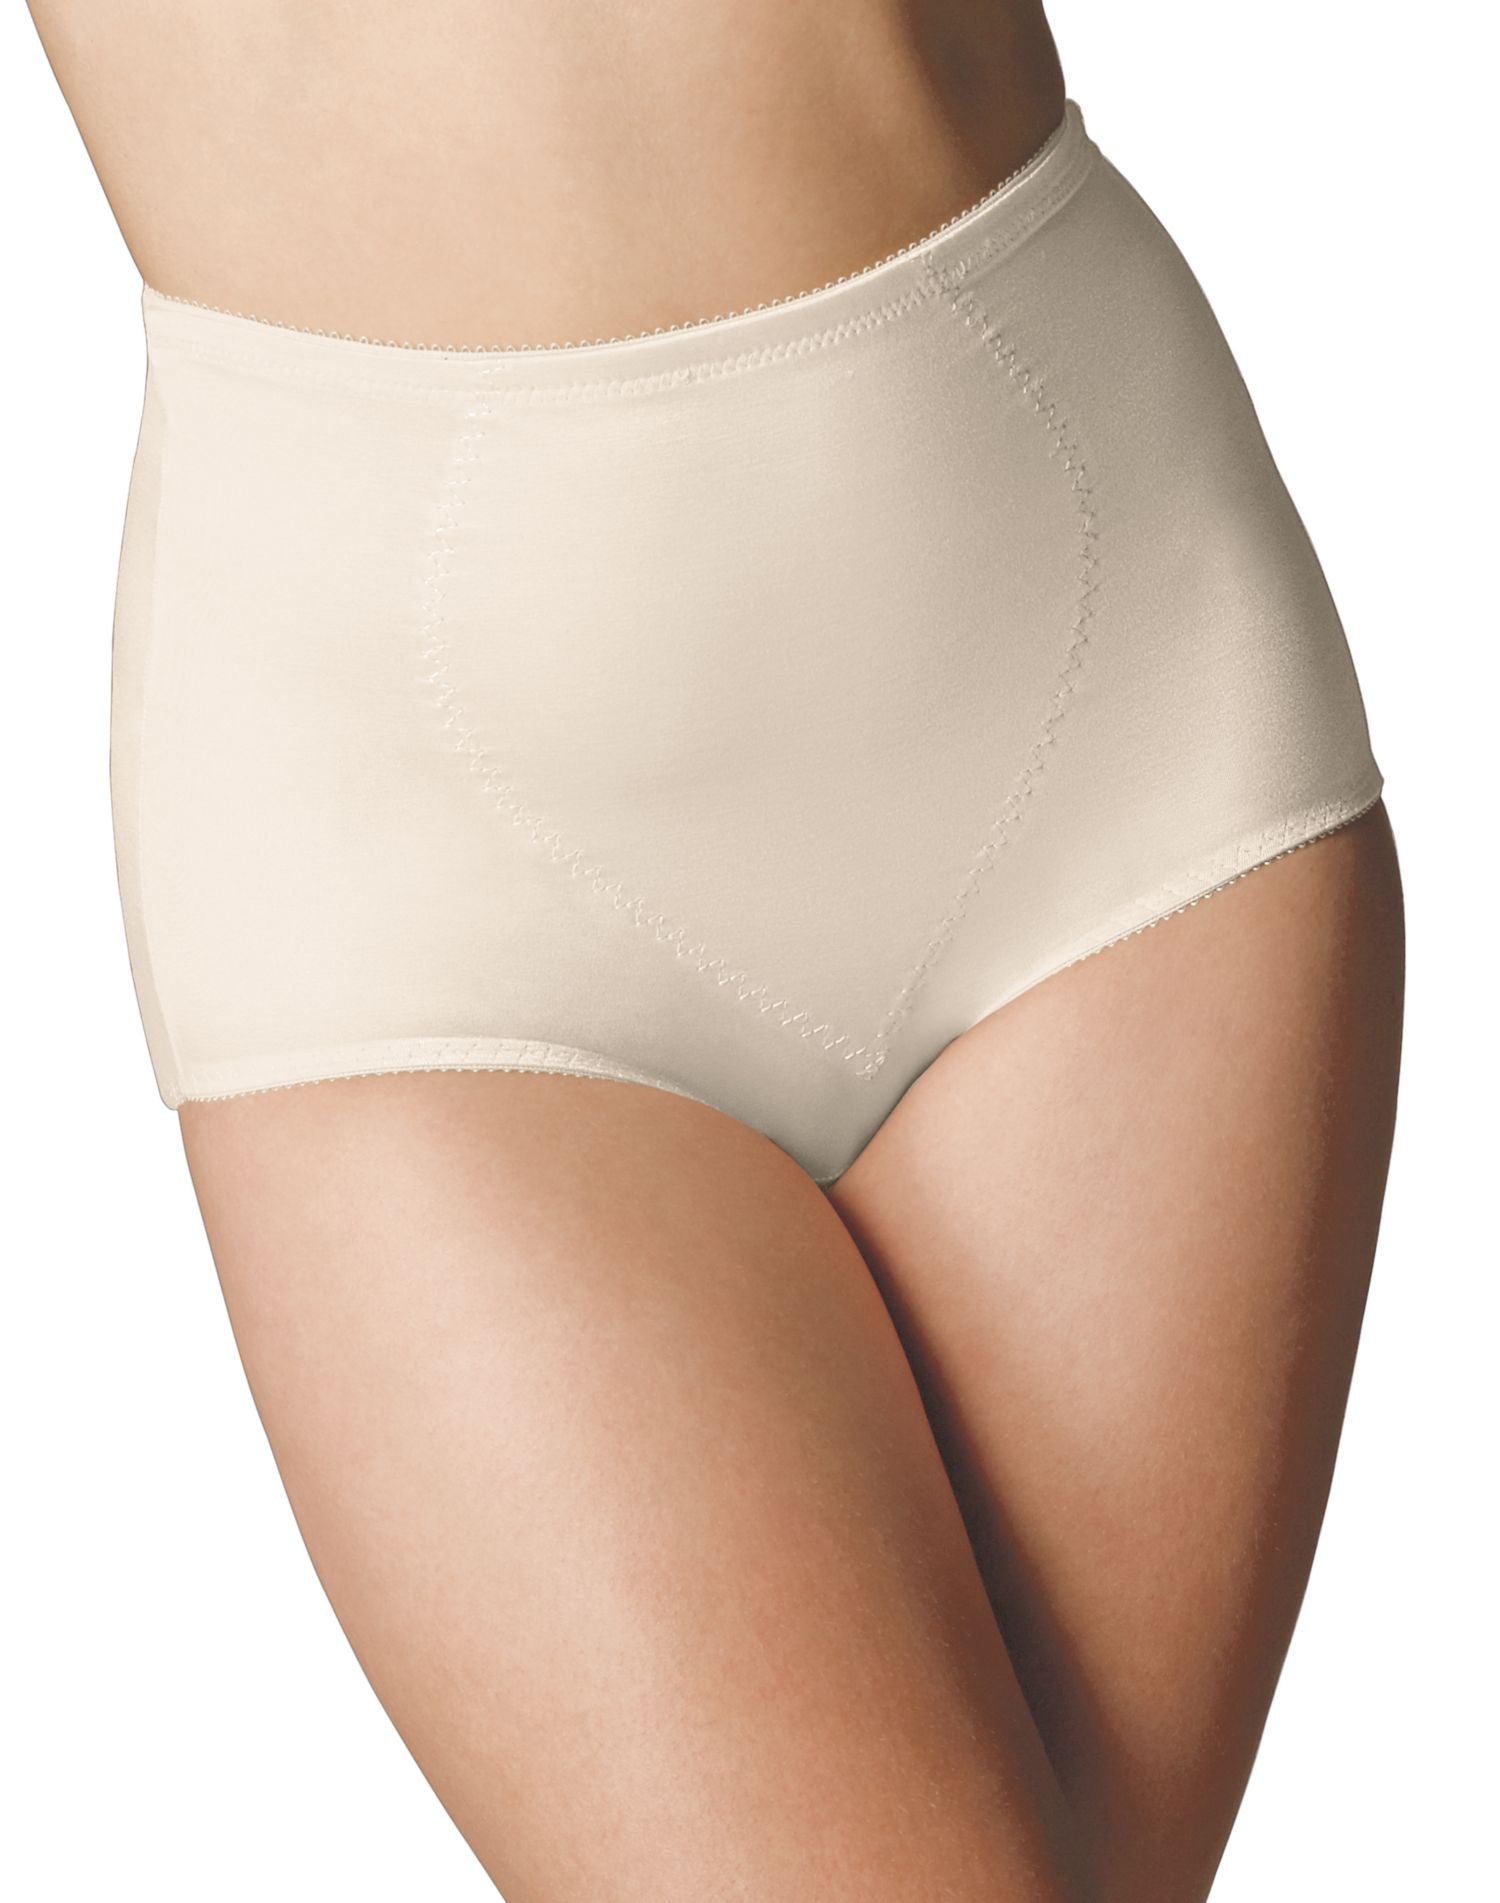 X372 - Bali Double Support Coordinate Light Control Brief 2 Pack